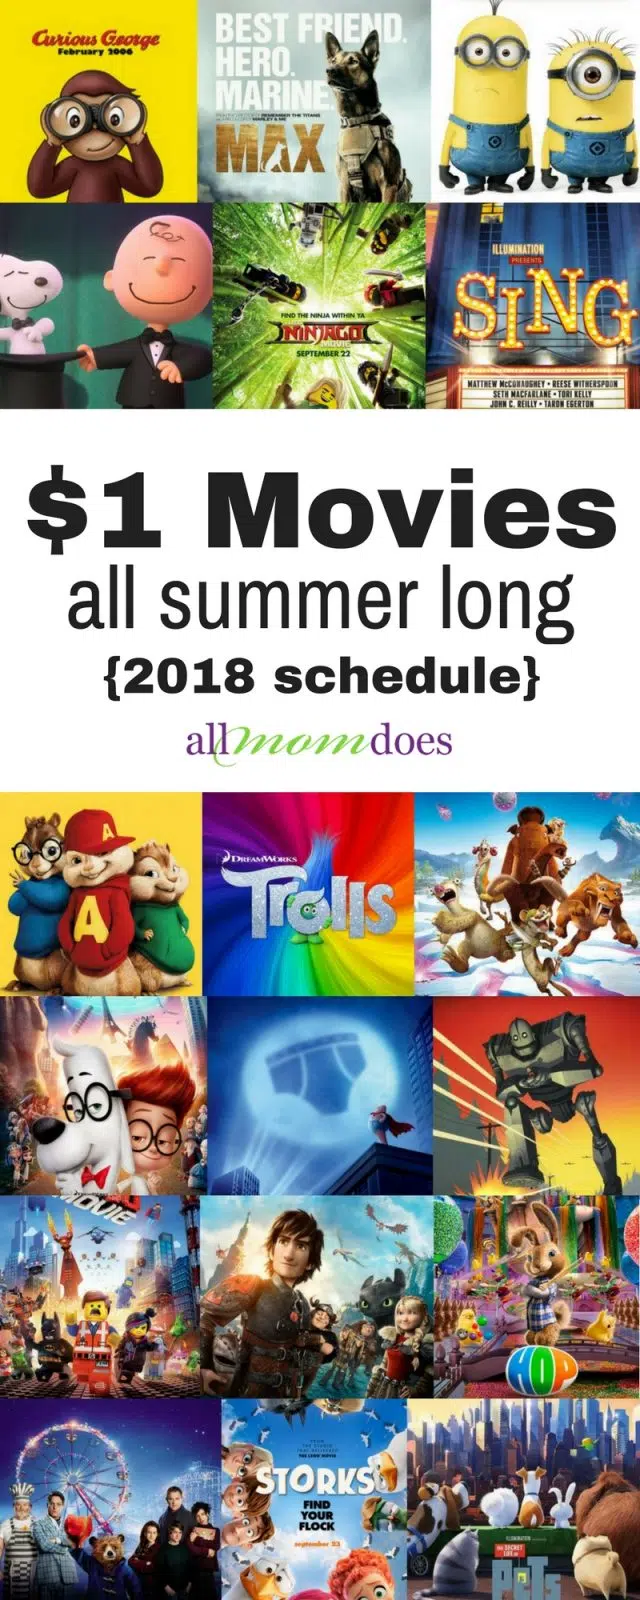 2018 Movie Schedule for the Regal Summer Movie Express - $1 movies all summer long! Cheap activity for kids! #movies #summerfun